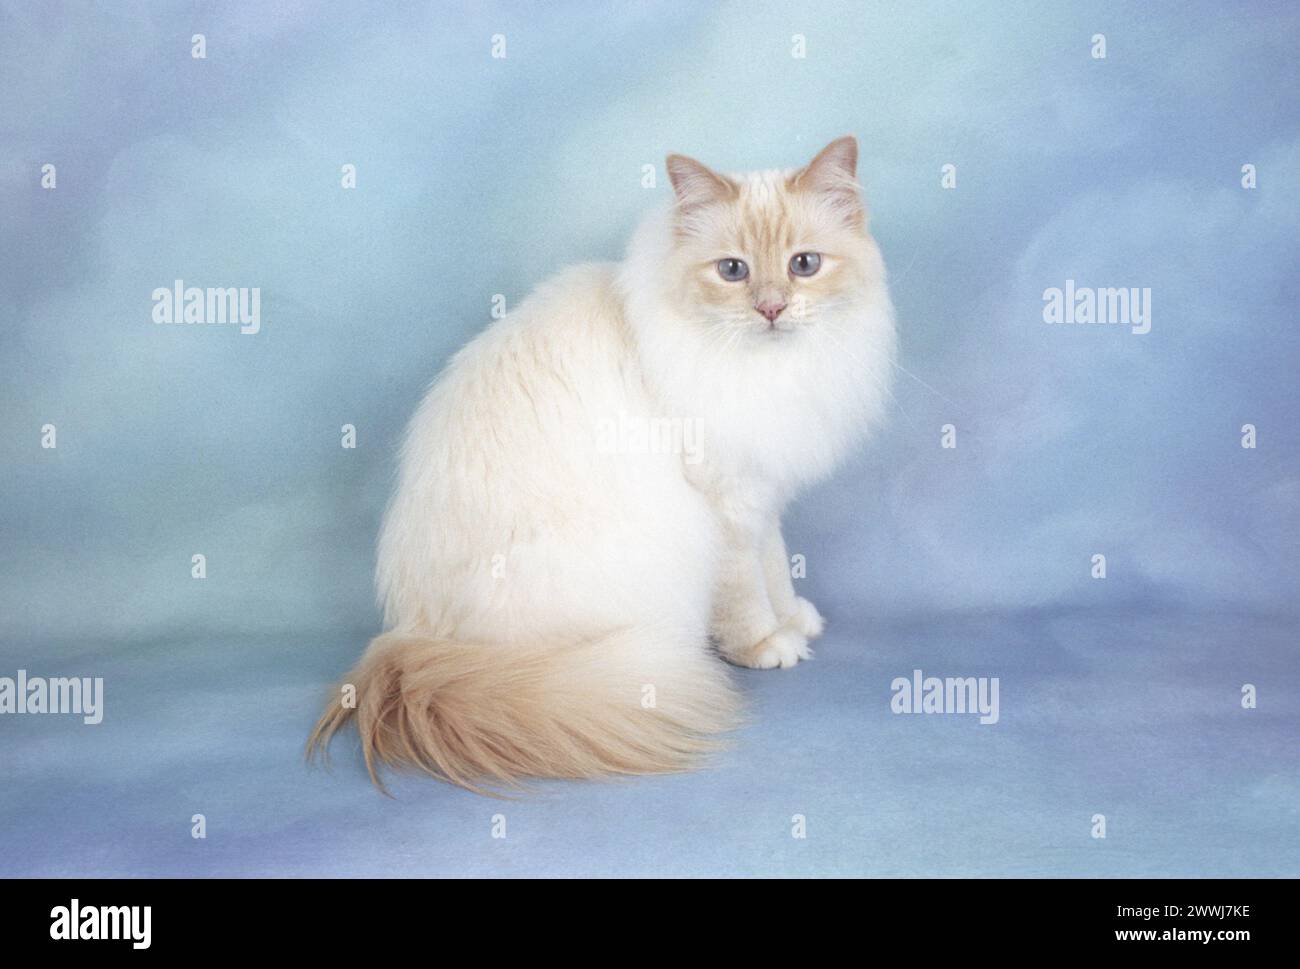 Adult Birman Cream Point Cat Sitting on a Cloudy Blue Background Stock Photo